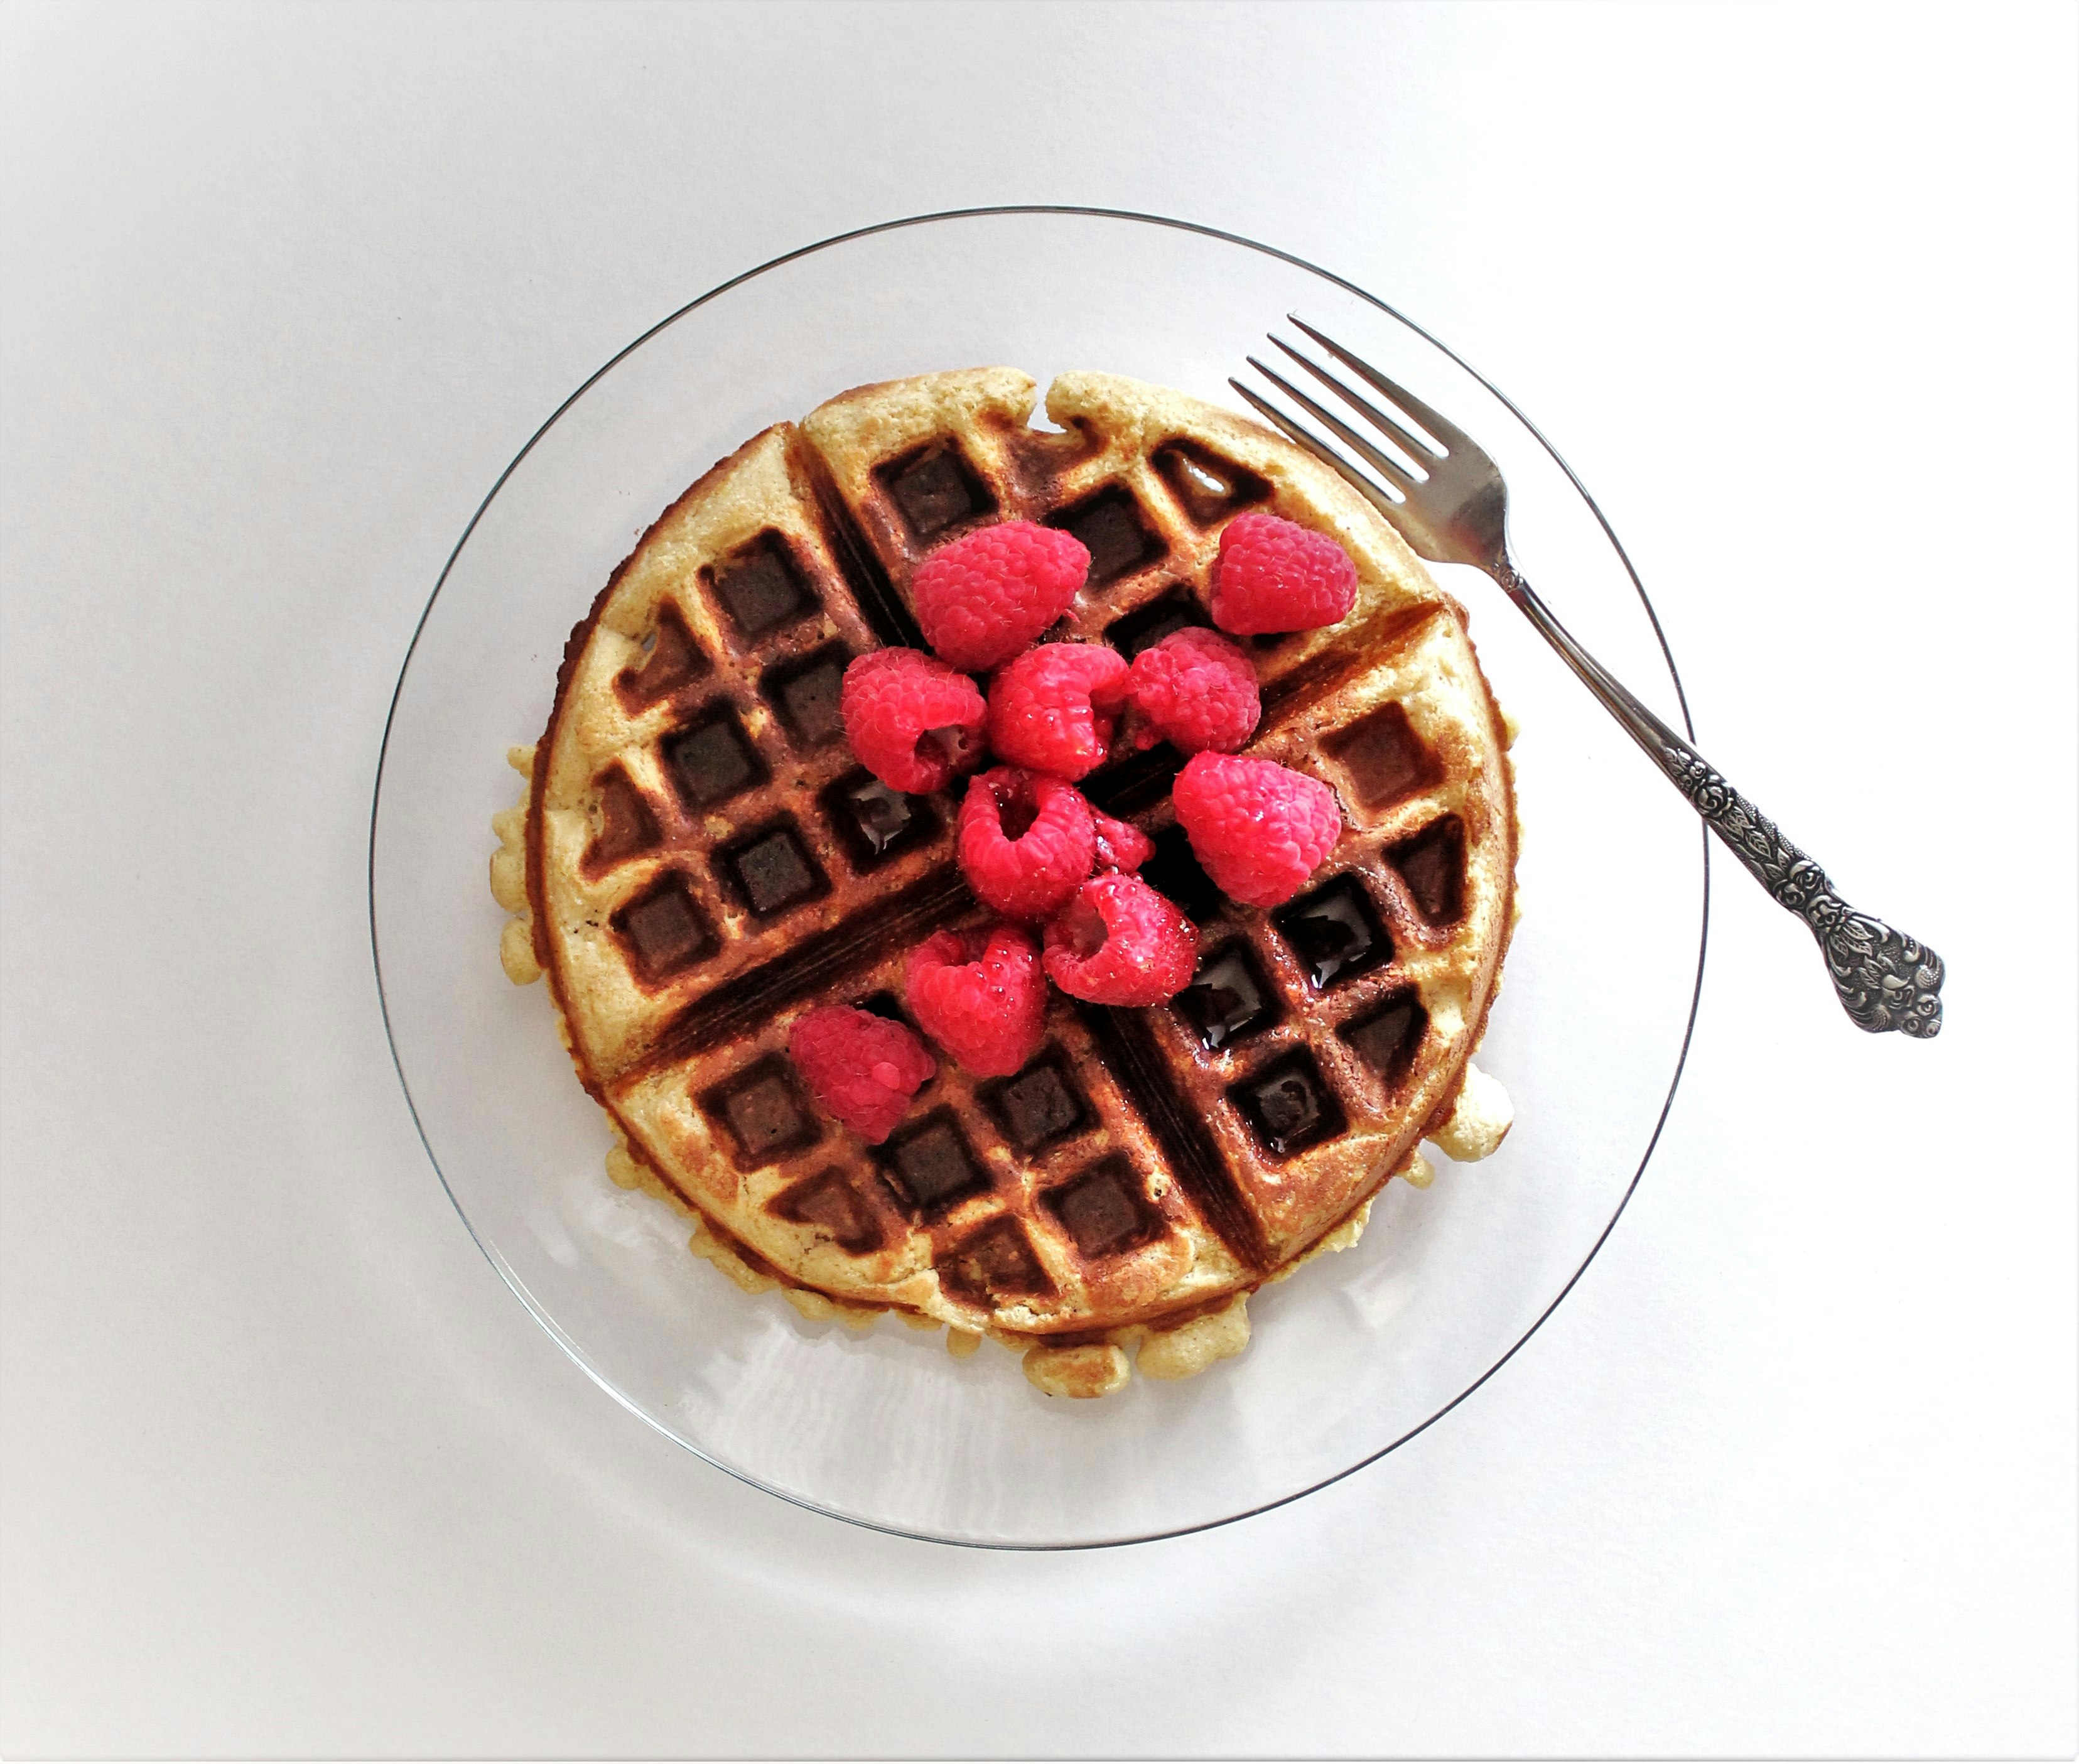 Plate with a vegan waffle, organic raspberries and syrup; Seattle vegan restaurants 